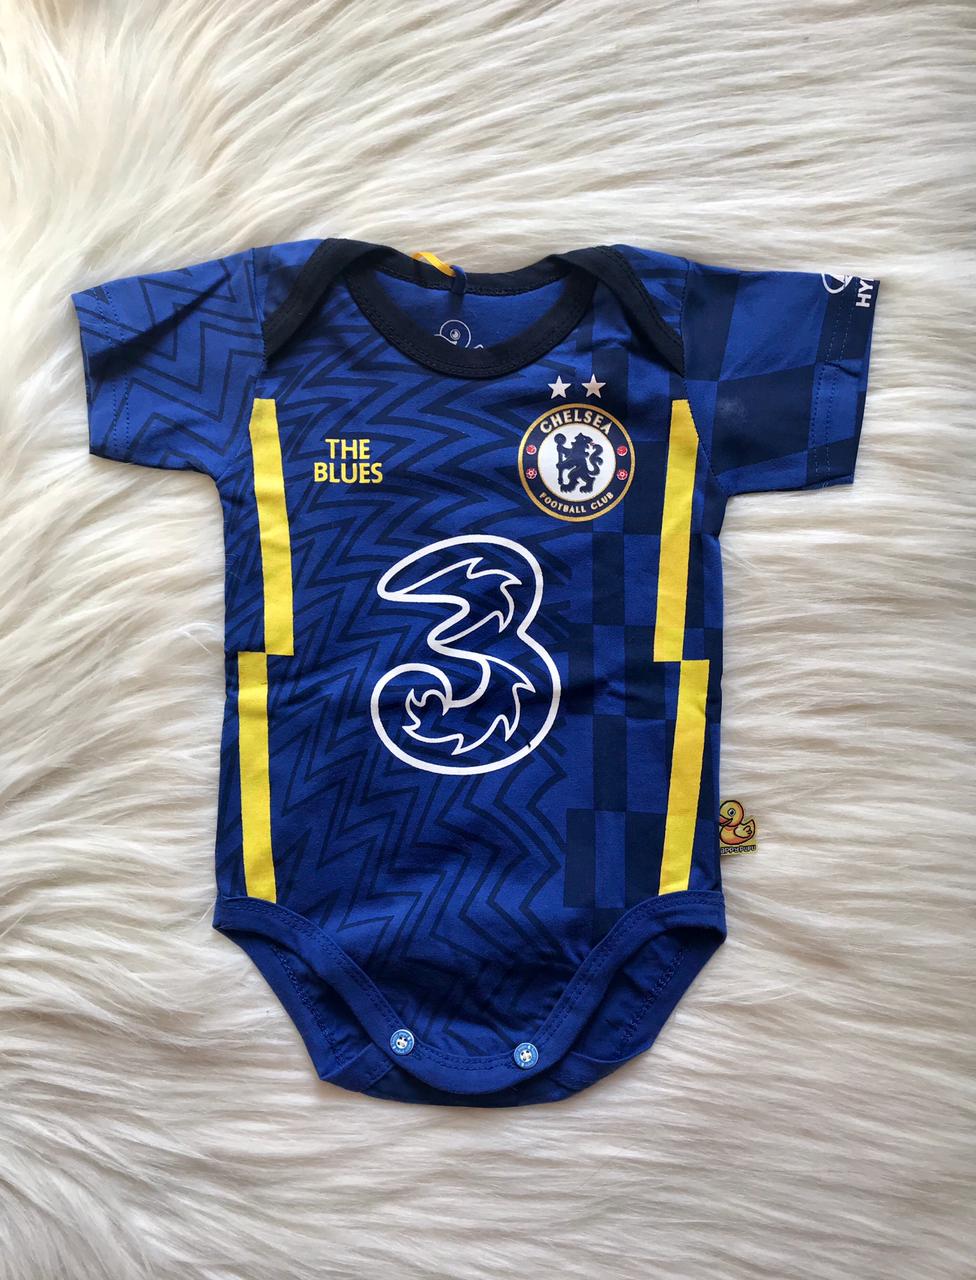 Melomoo Baby Football Jumper Chelsea Home Clothing Set